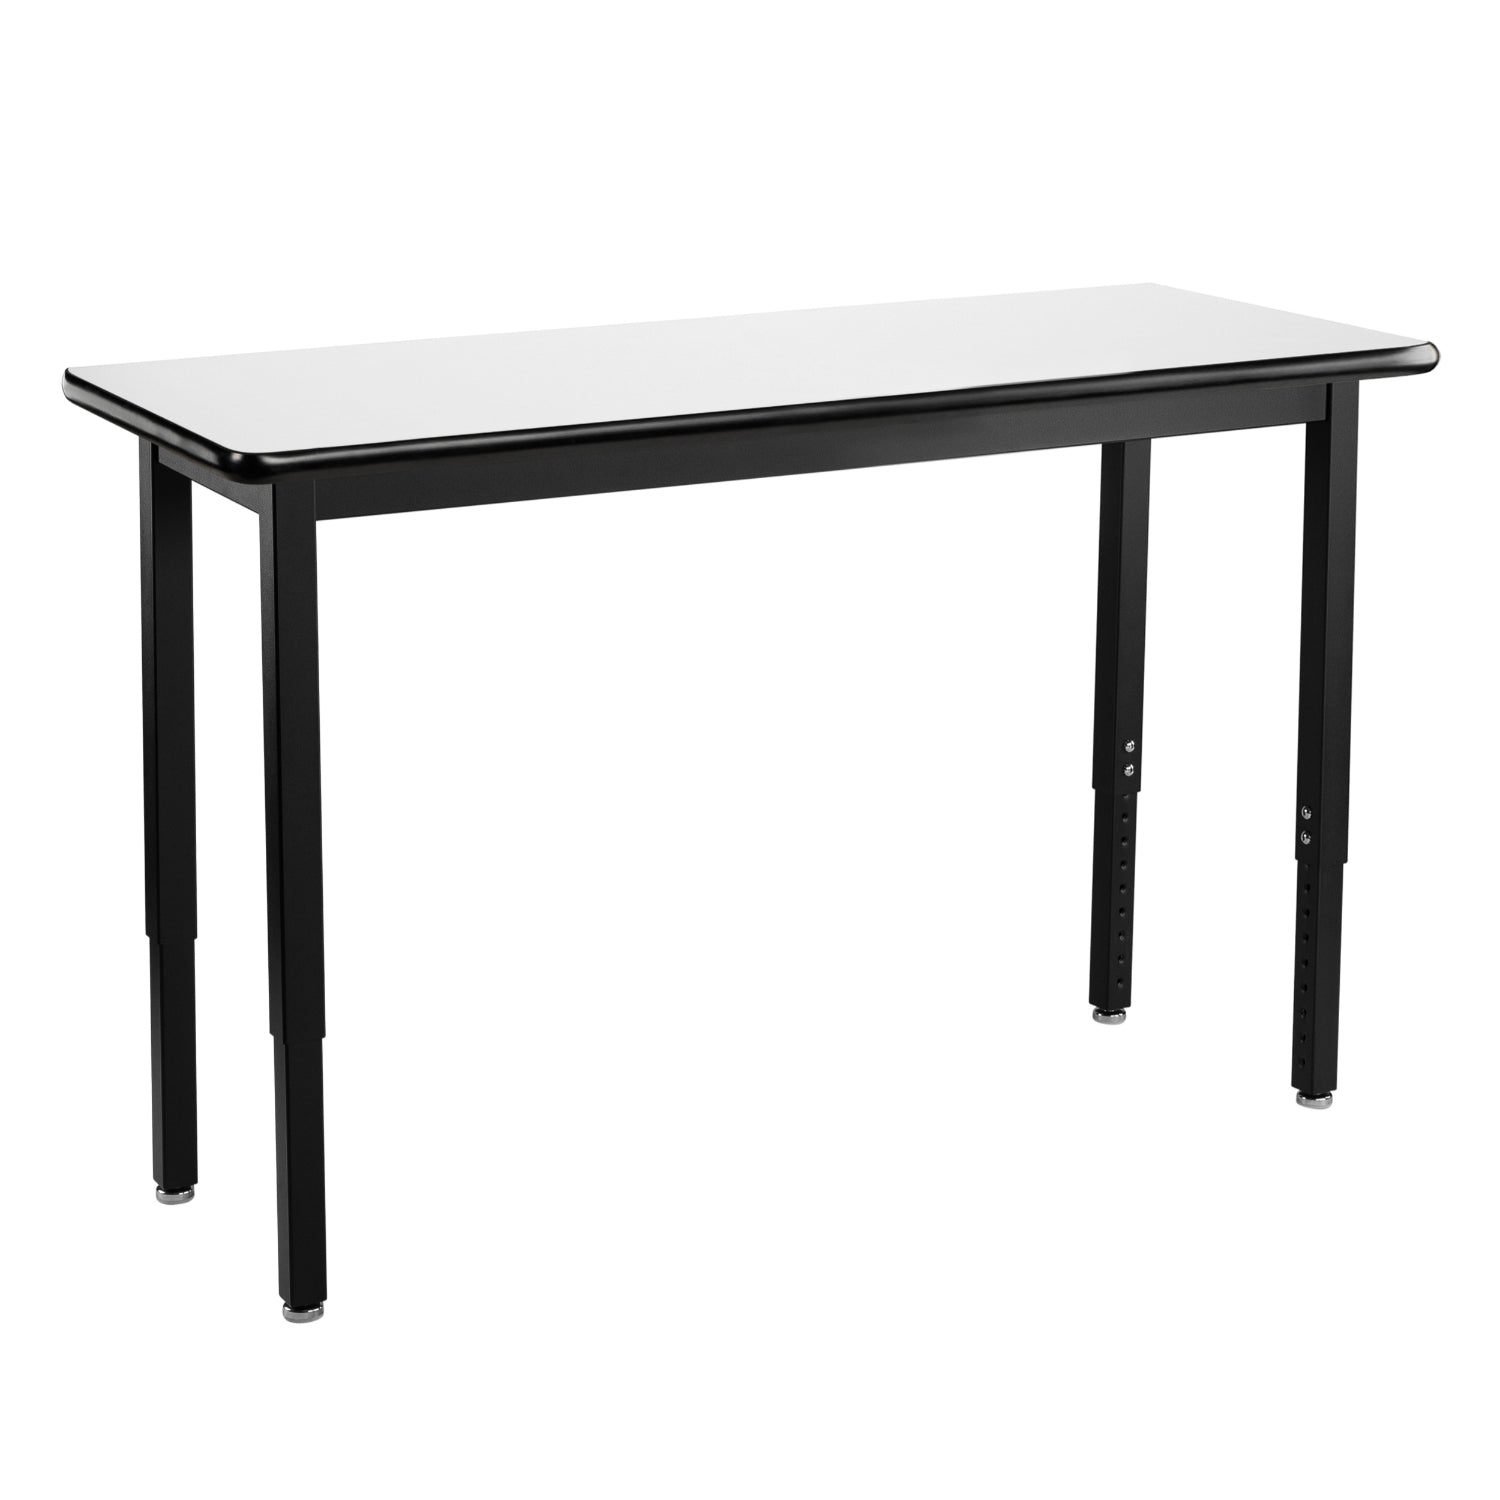 Heavy-Duty Height-Adjustable Utility Table, Black Frame, 18" x 72", Whiteboard High-Pressure Laminate Top